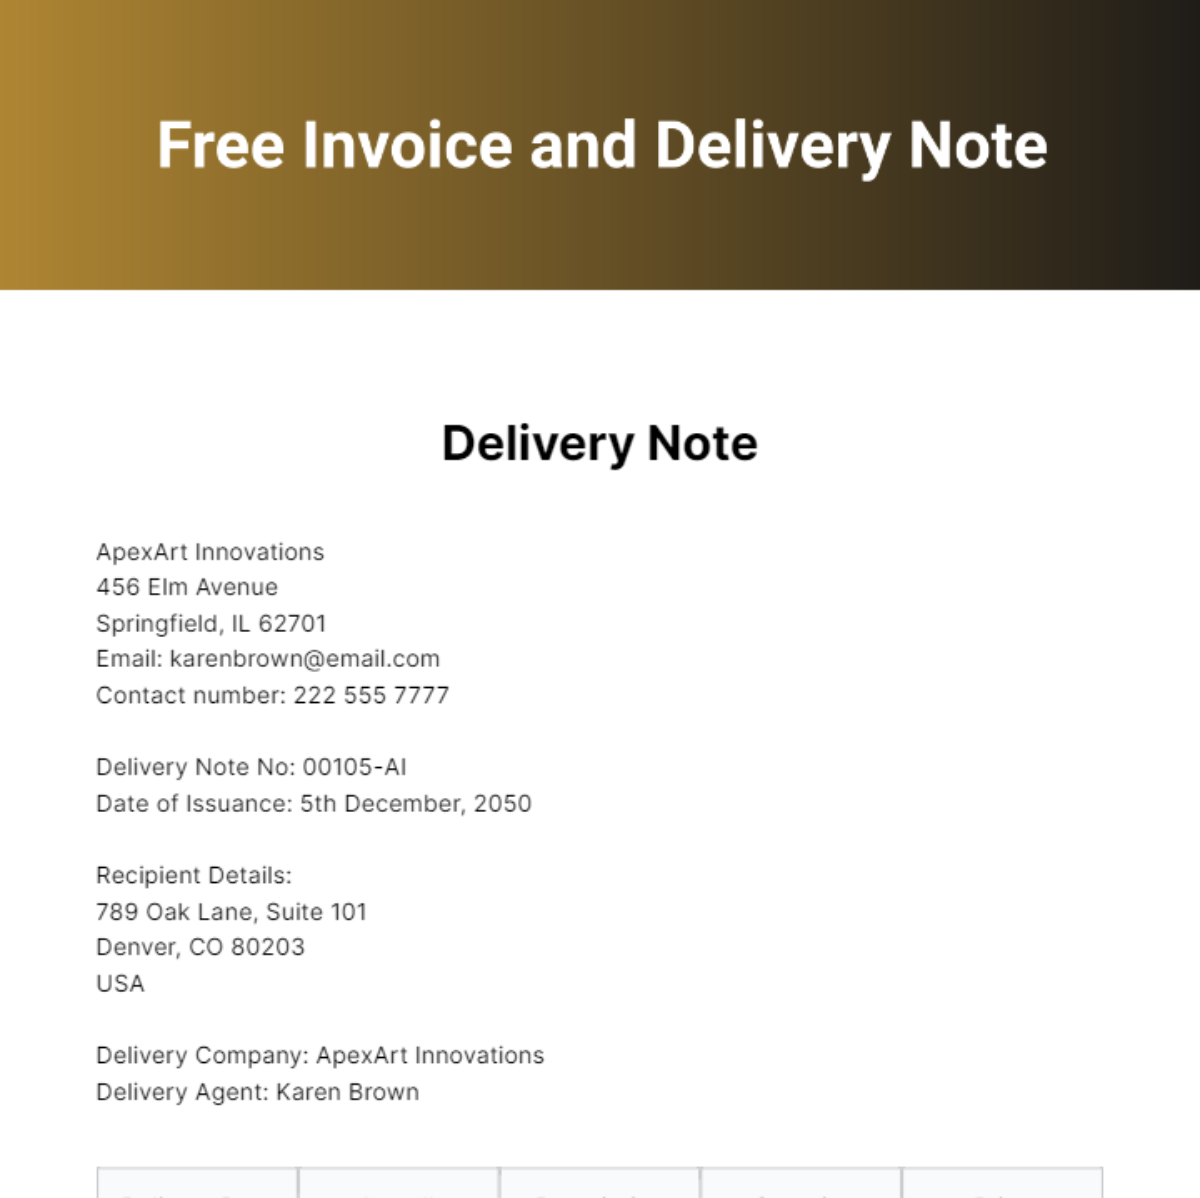 Invoice and Delivery Note Template